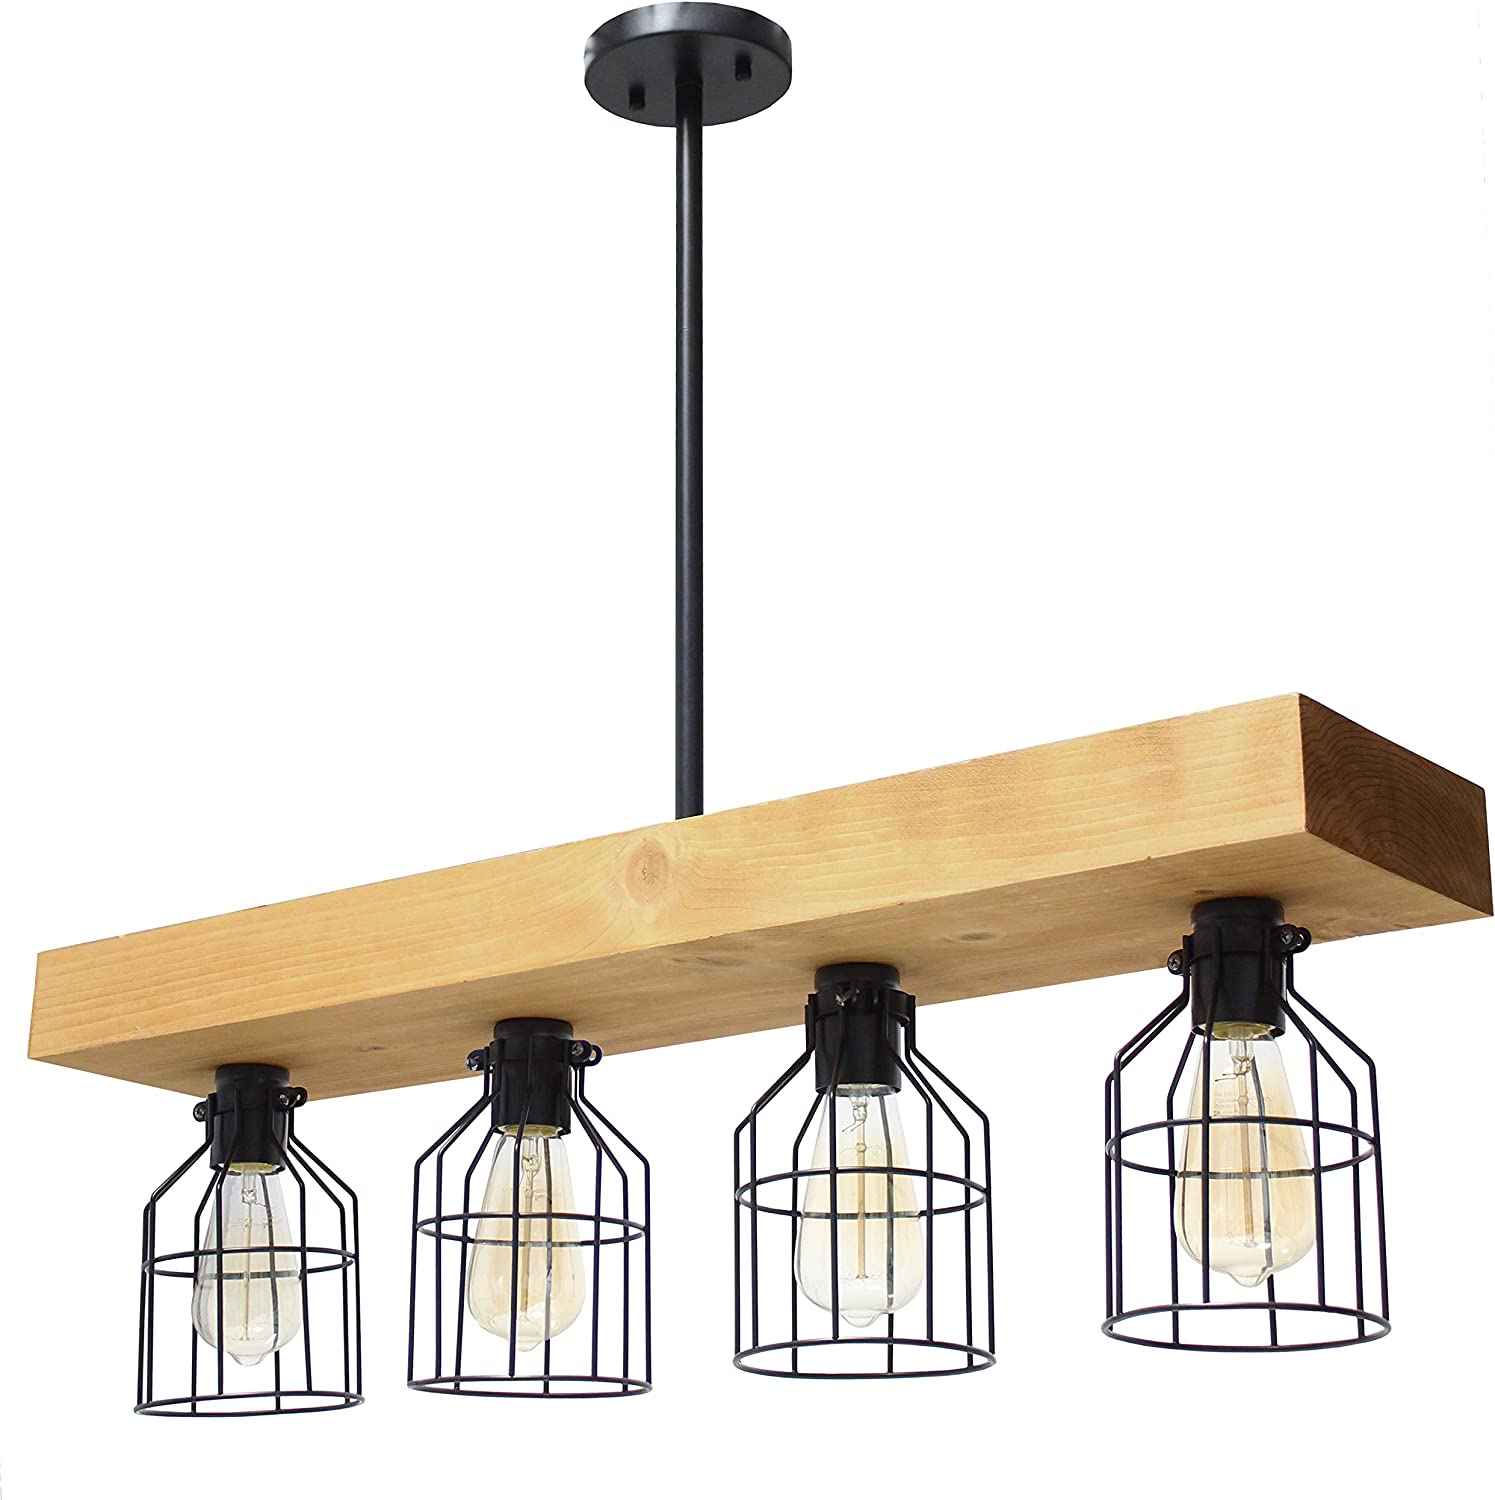 Elegant Designs CH1001-LWD 4 Light Rustic Farmhouse Industrial Wired Cage Pendant Island Light Chandelier, Light Wood